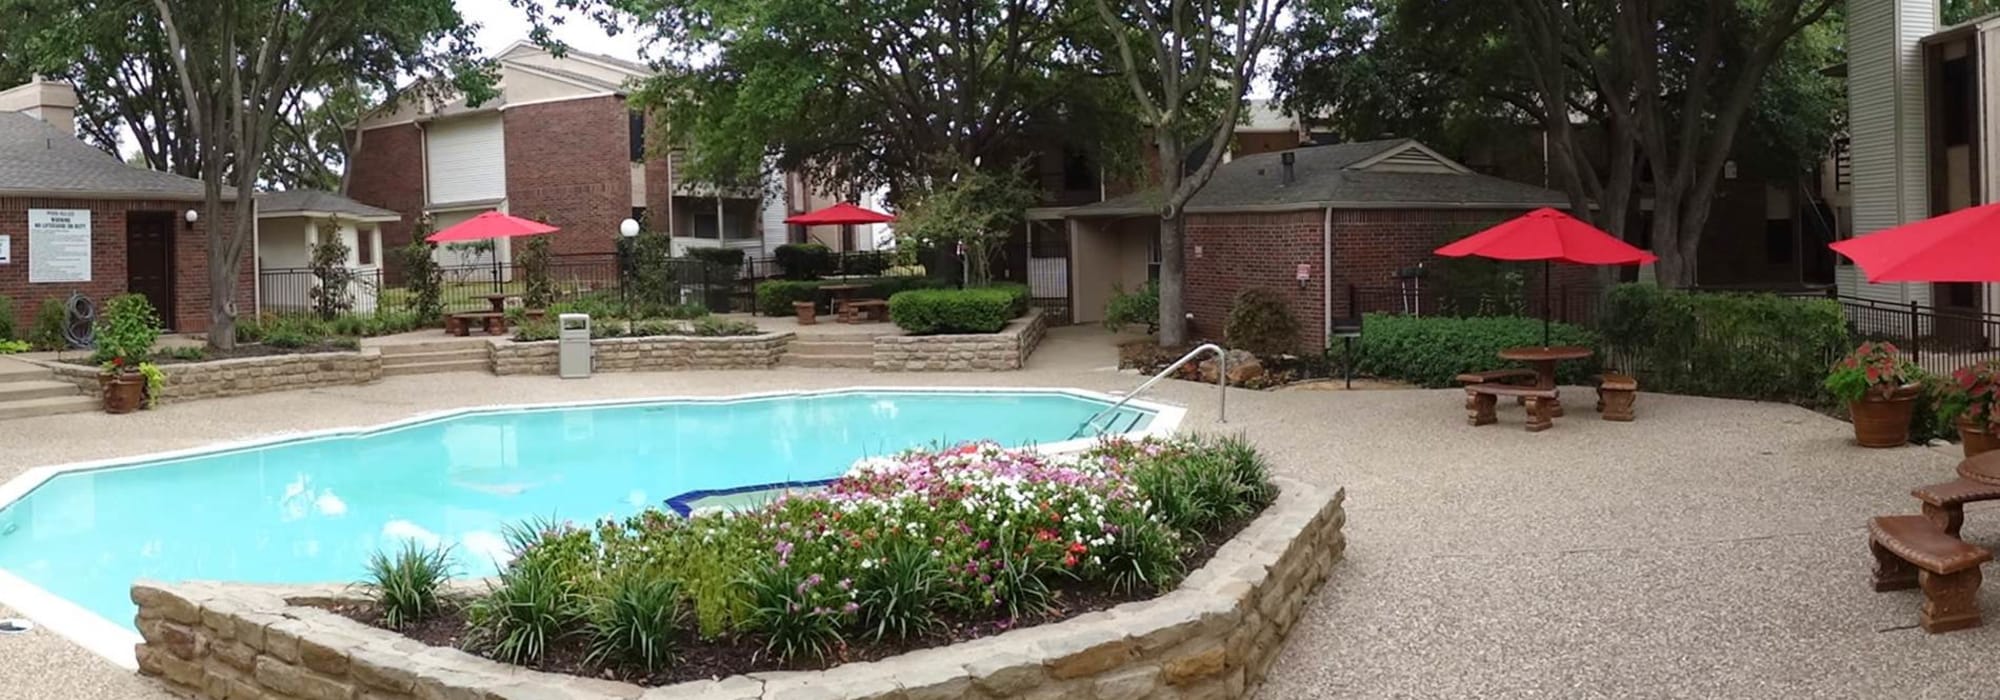 Apply to live at Willow Glen in Fort Worth, Texas